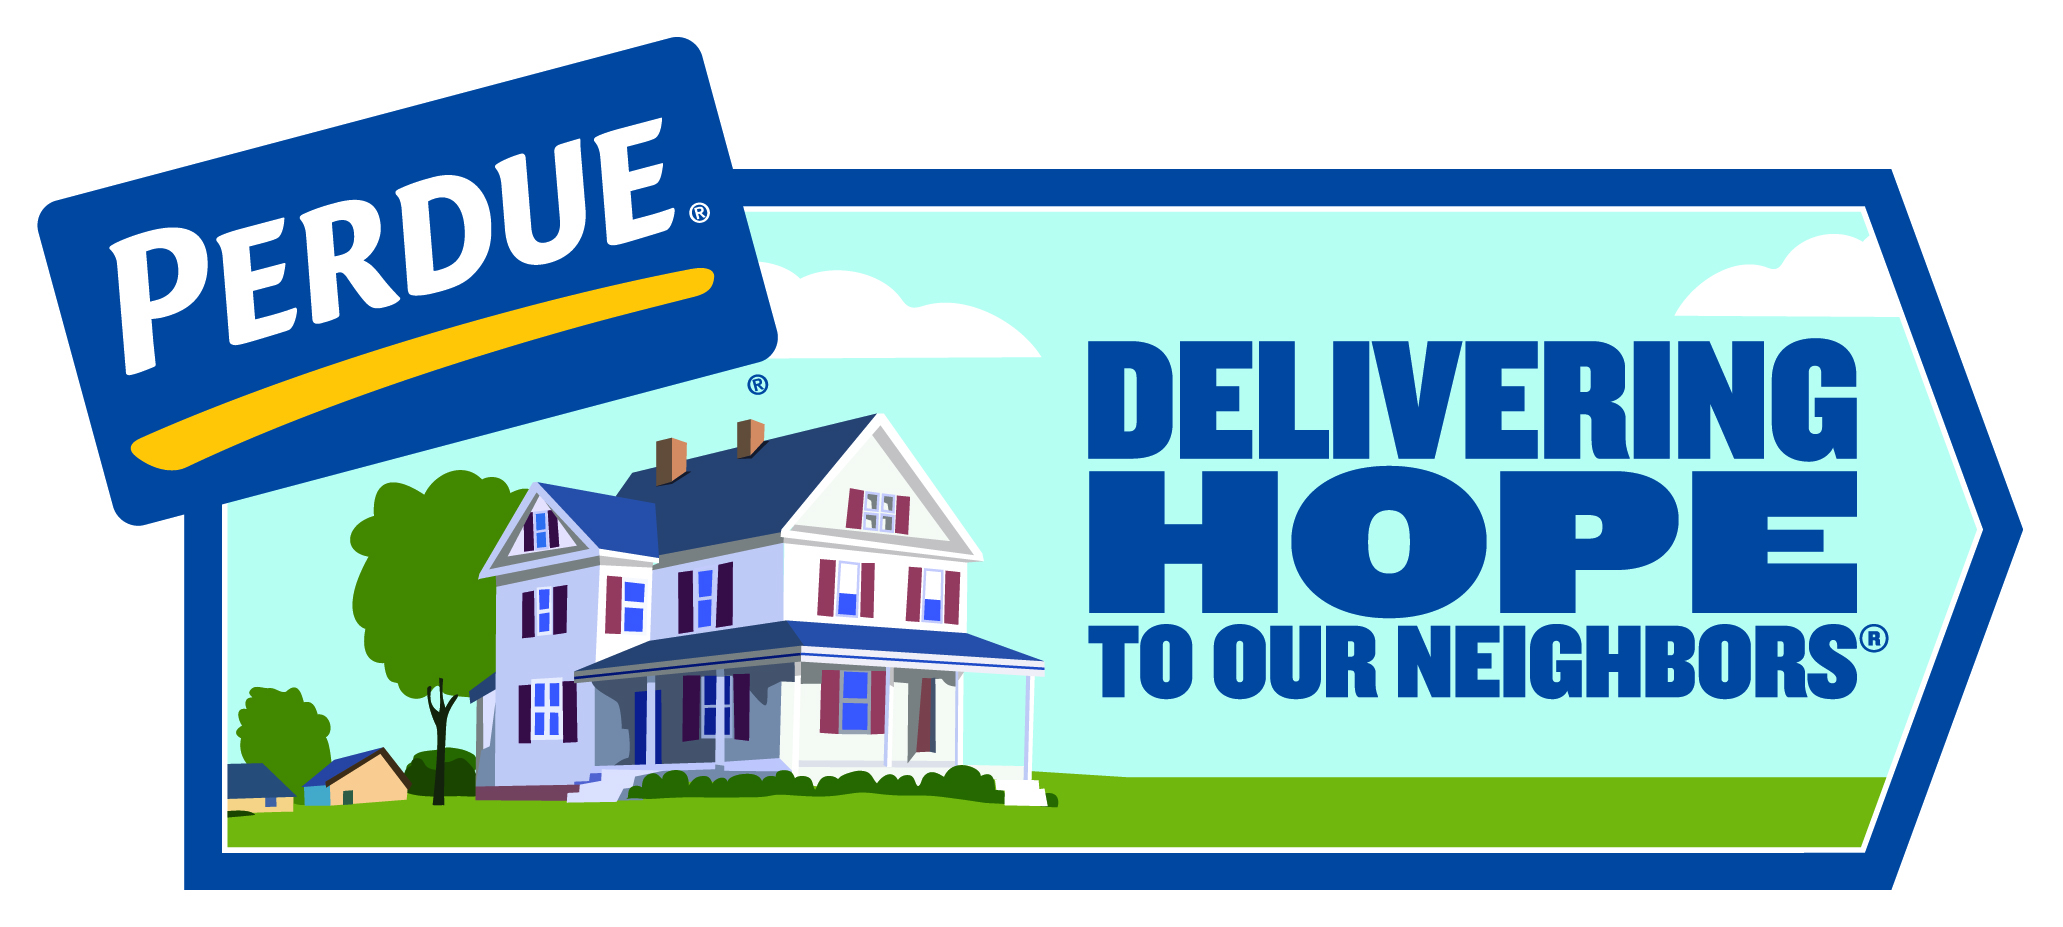 Perdue's 'Delivering Hope To Our Neighbors' outreach logo